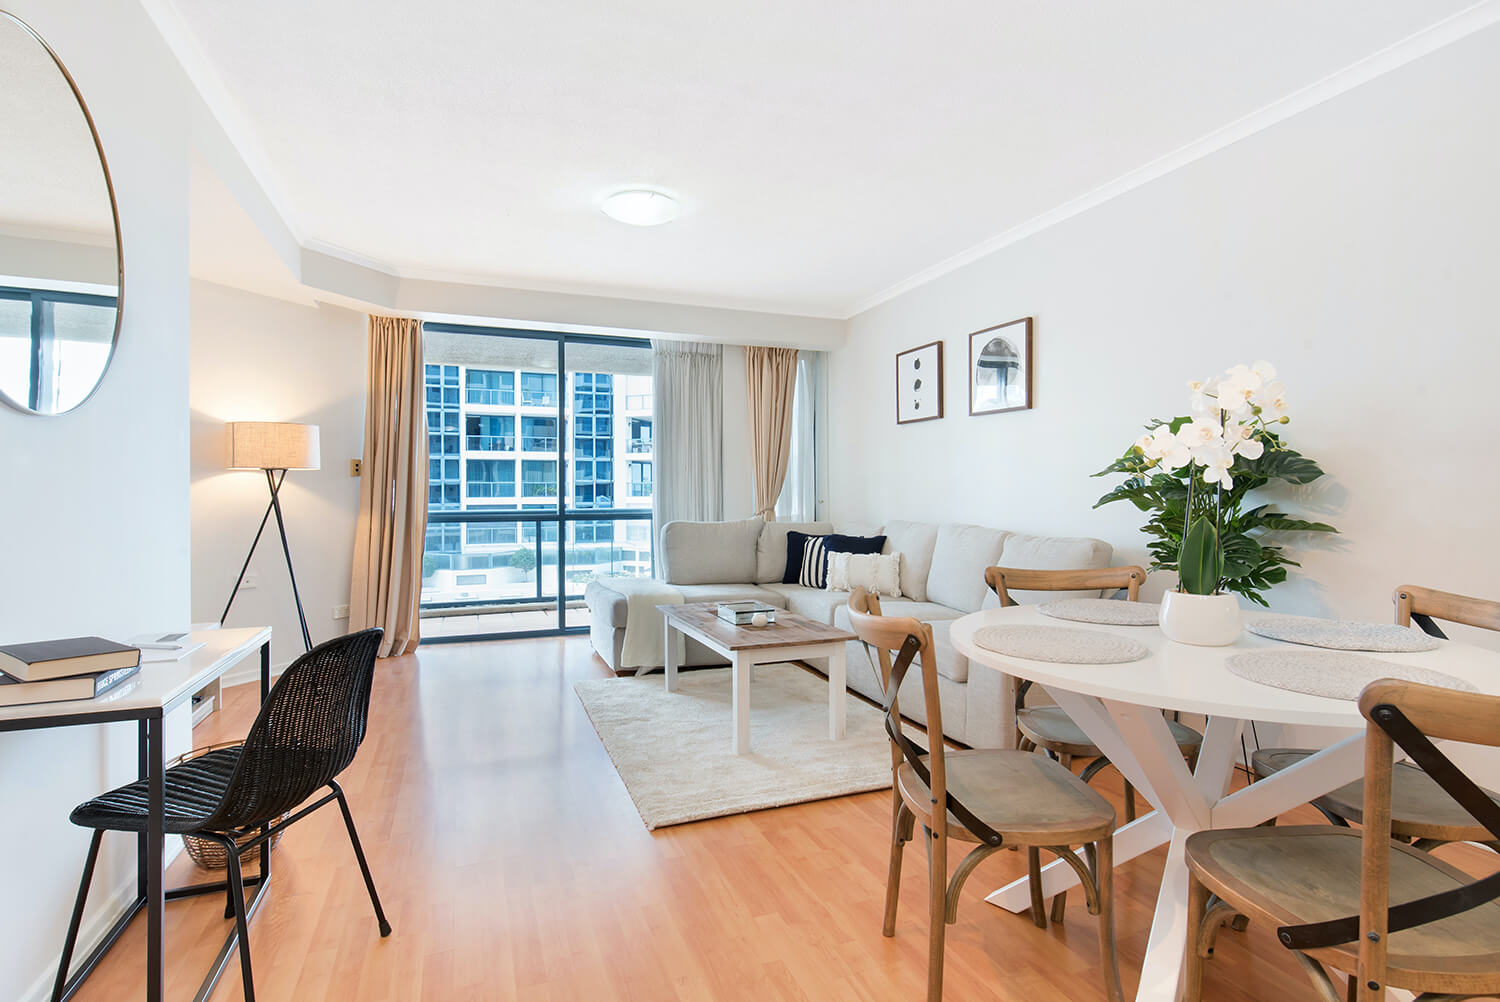 The money apartment buyer gave us a better price than listing it did